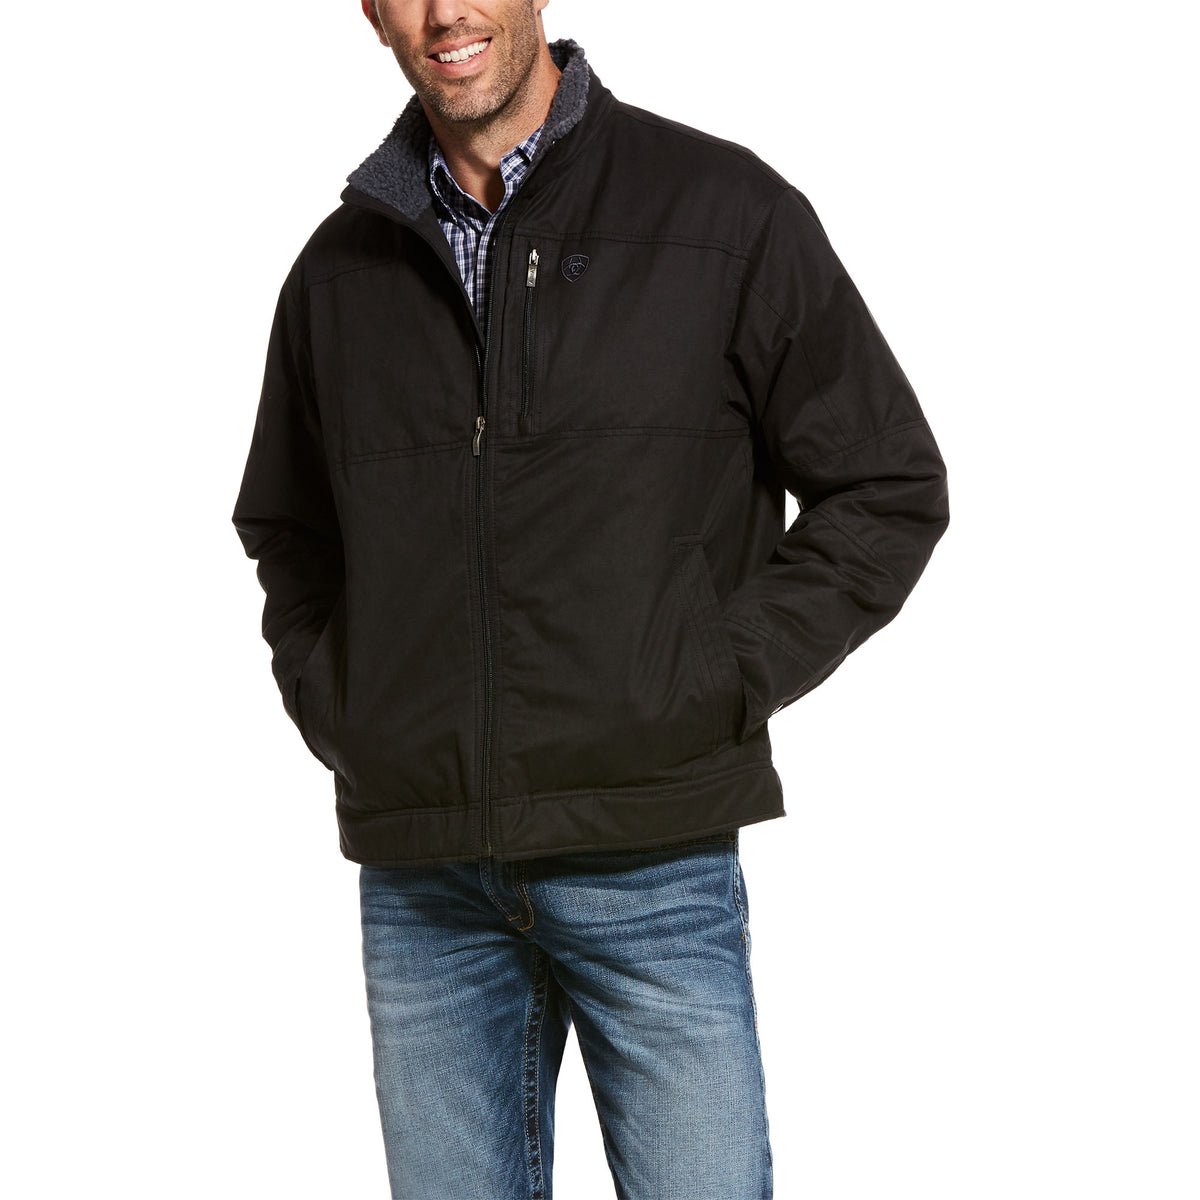 Ariat Mens Grizzly Canvas Insulated Jacket - Black